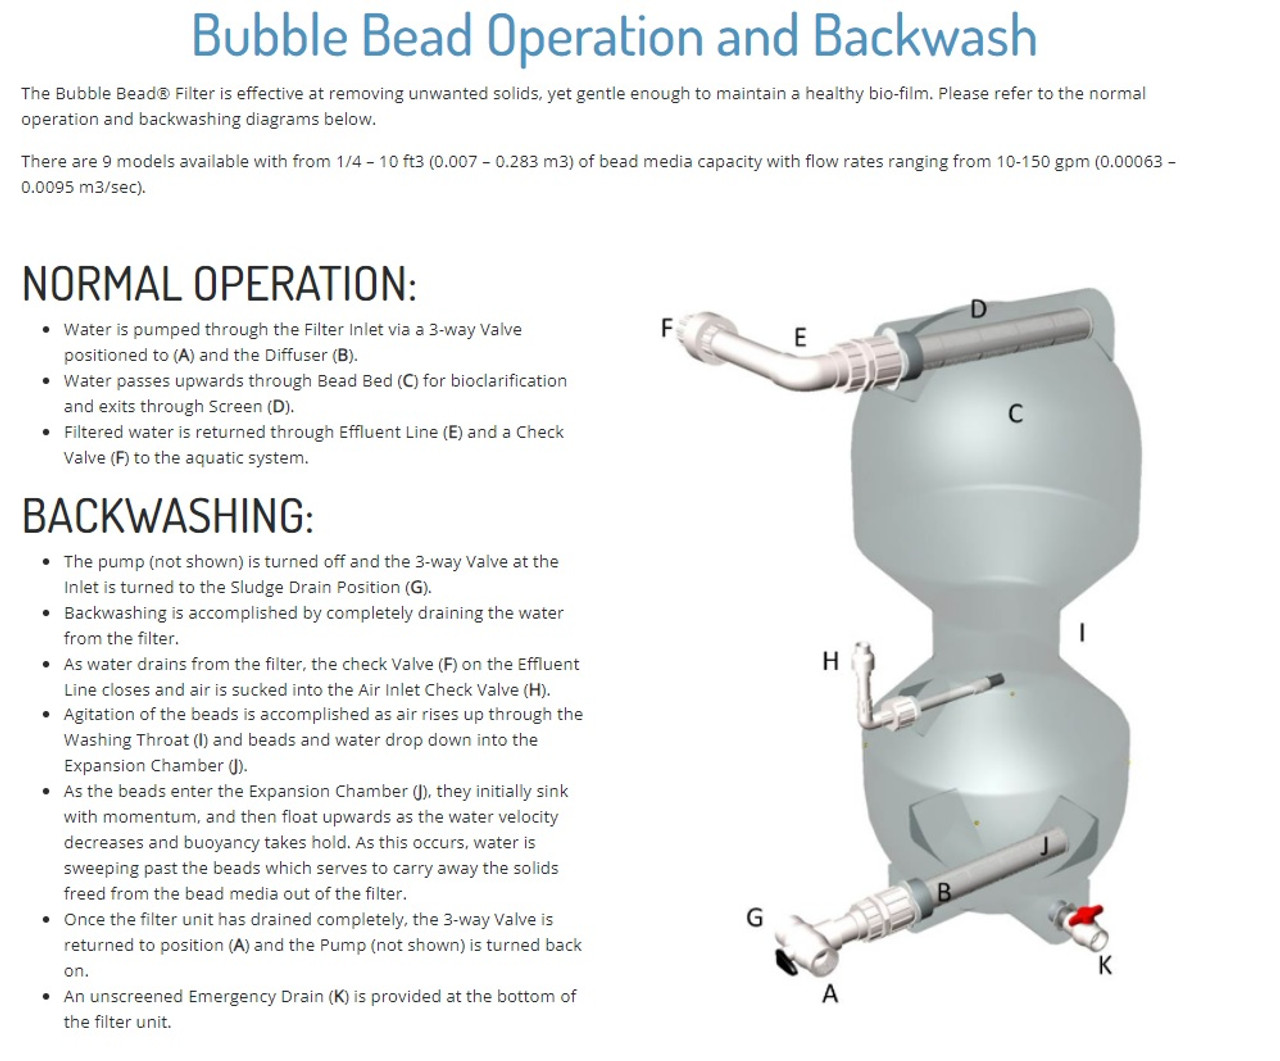 AST Bubble-Washed BBF-XS4000 Bead Filter Skid System w/ UV